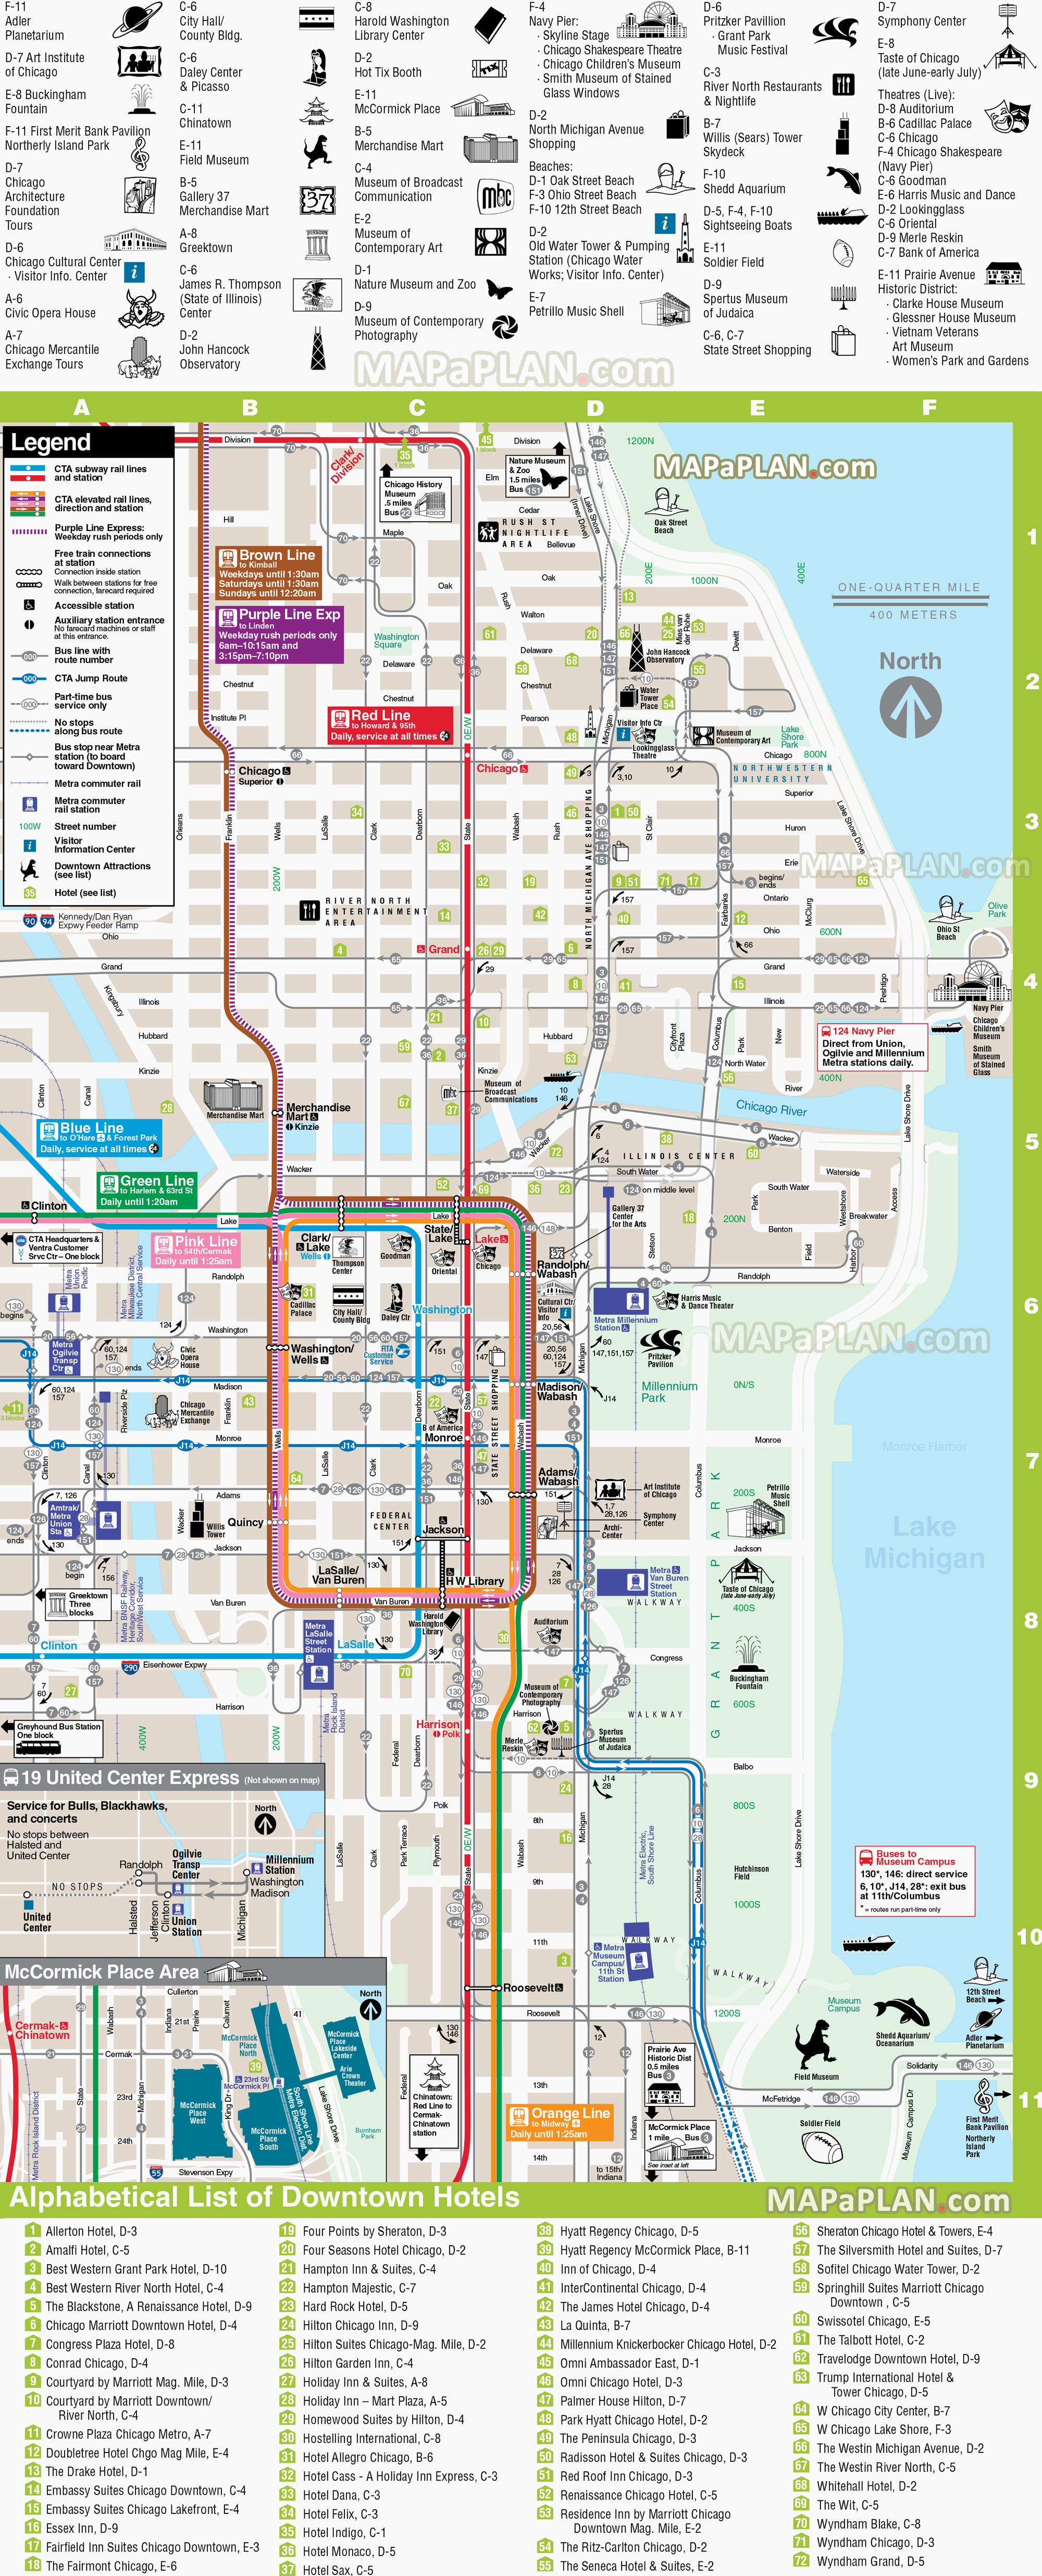 direction downtown hotels rta rail link transit chicago river Civic Lyric Opera House navy pier willis sears tower Buckingham Fountain Chicago top tourist attractions map